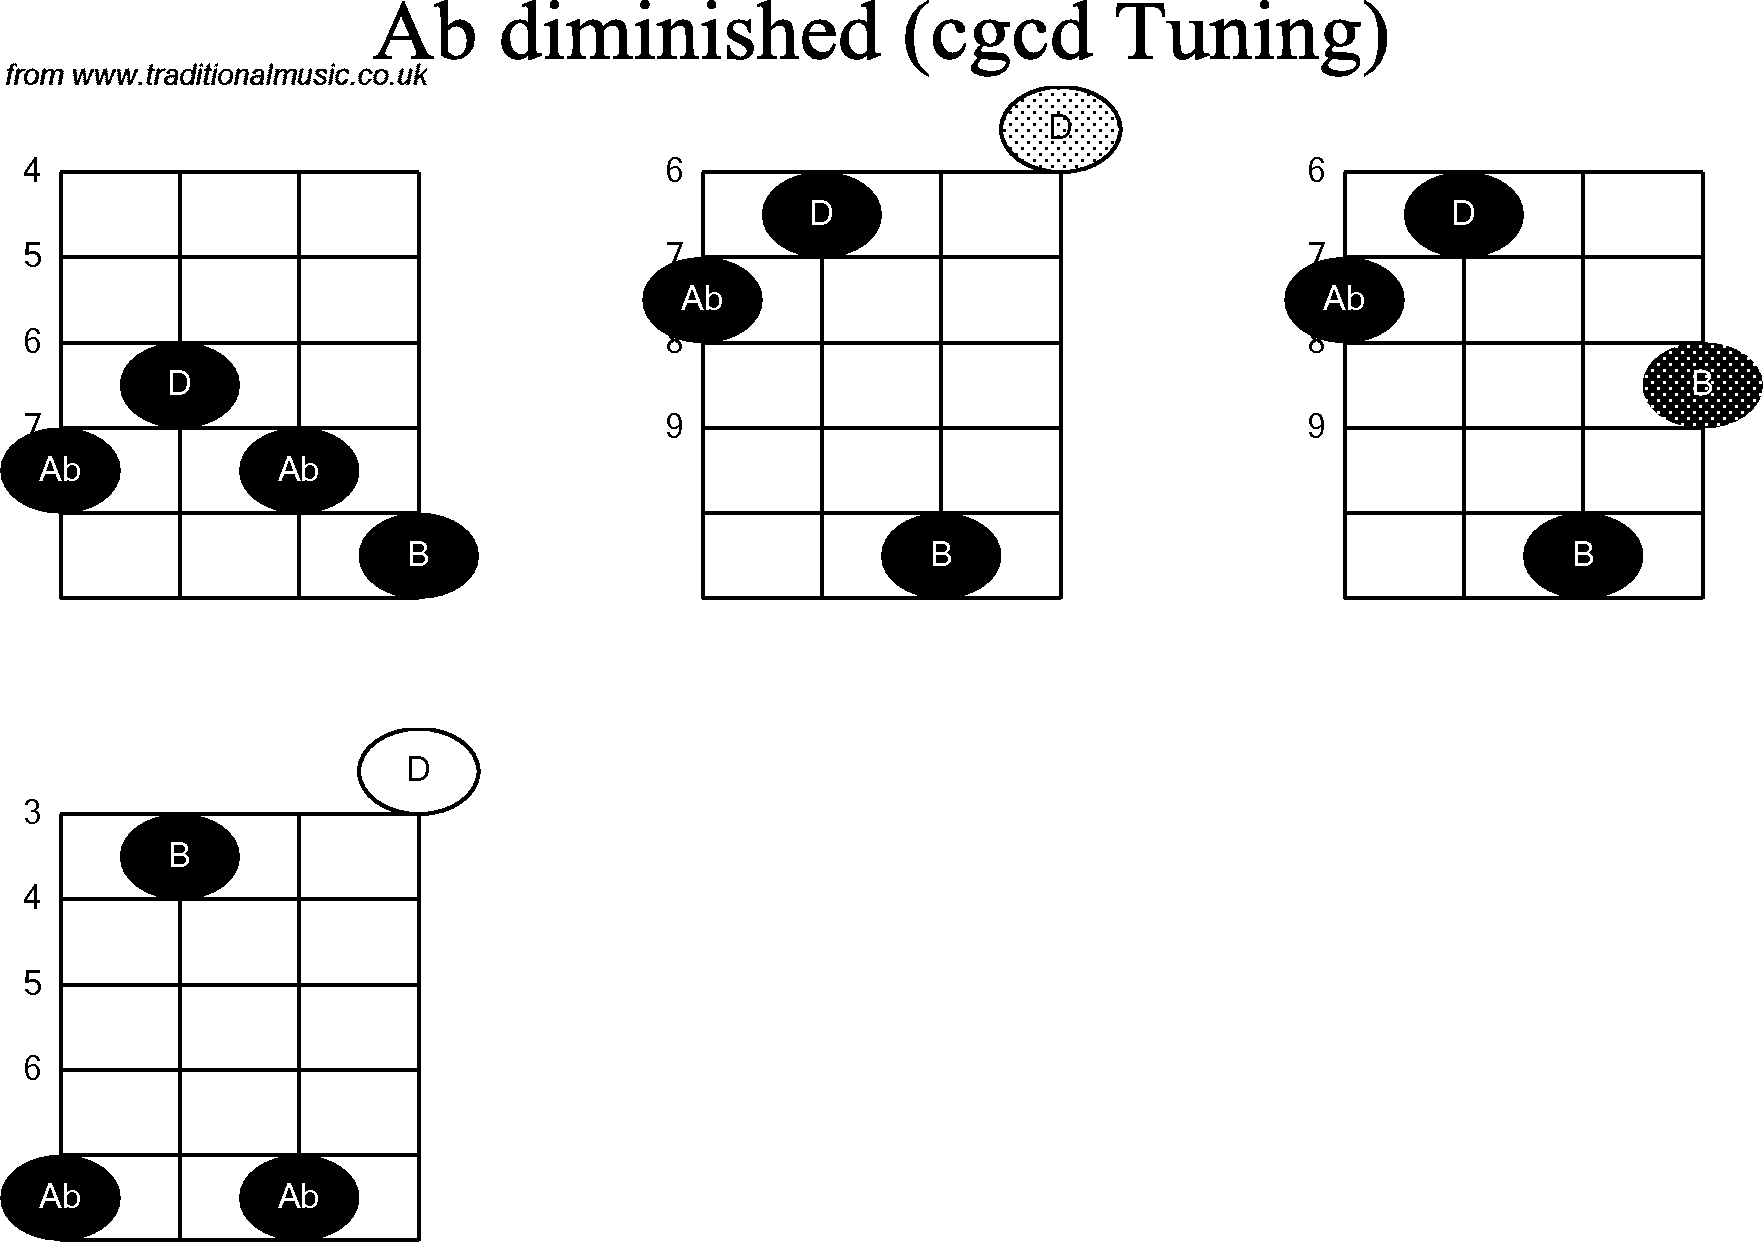 Chord diagrams for Banjo(Double C) Ab Diminished